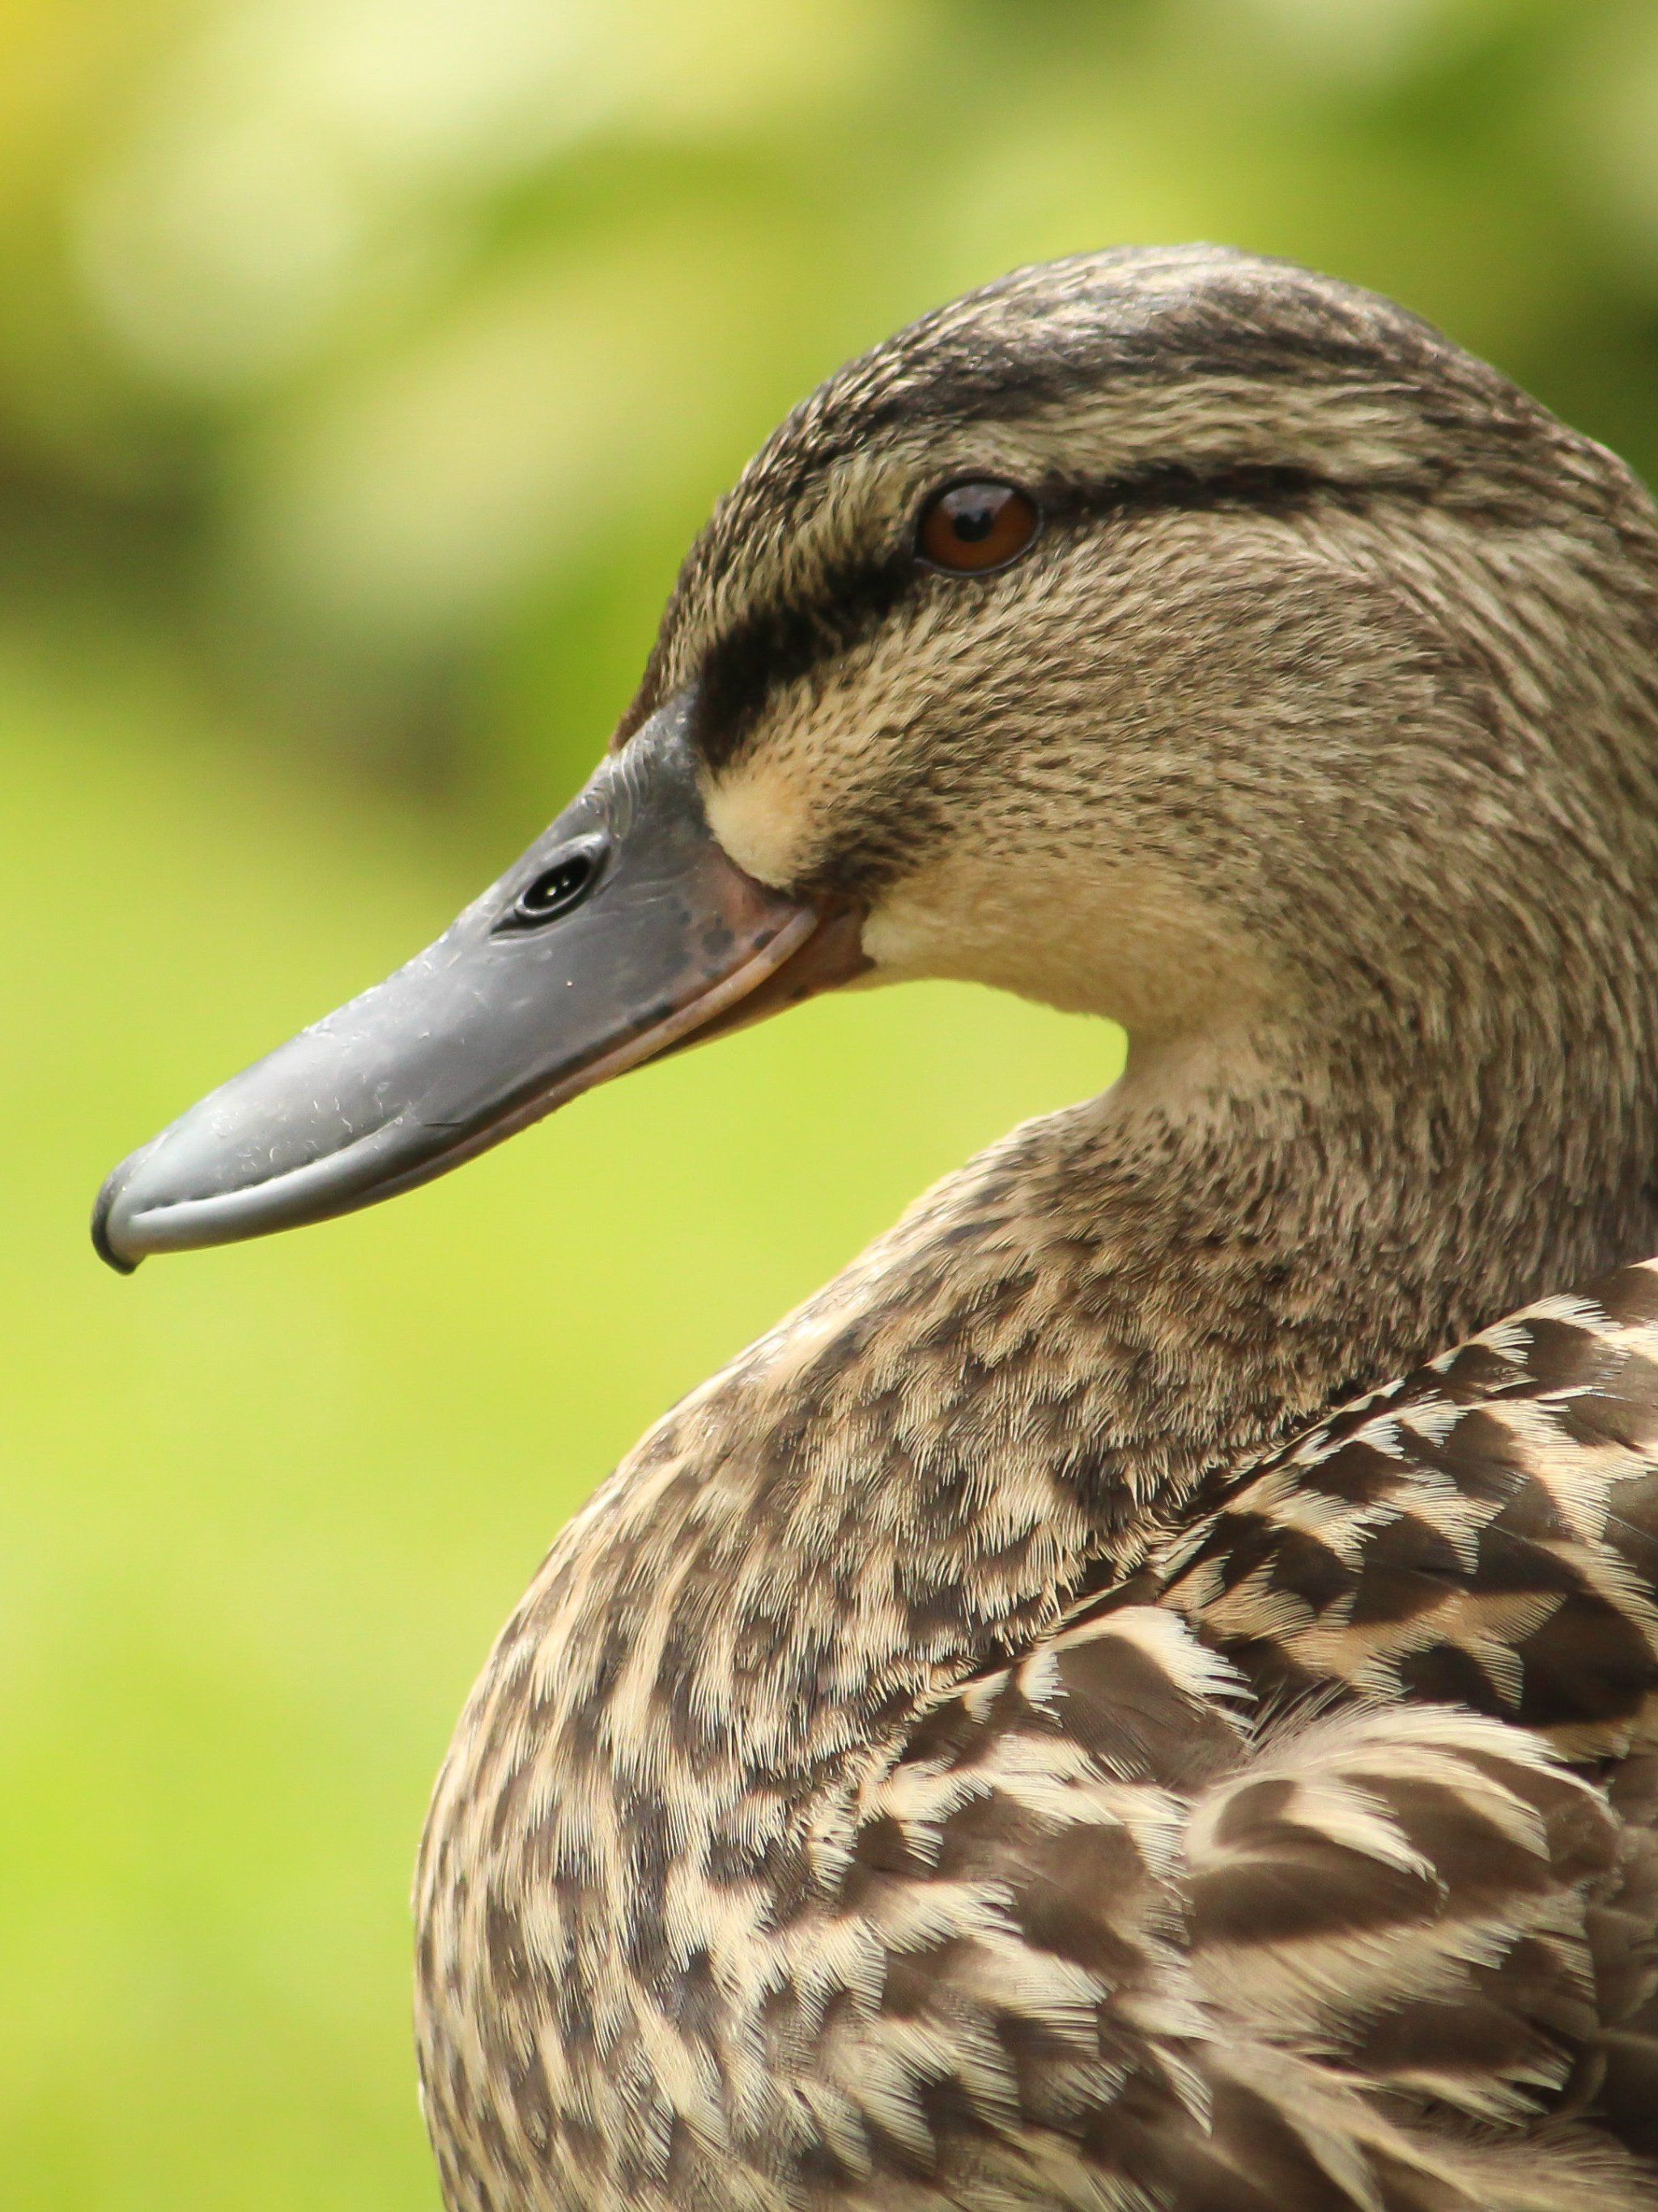 A duck with a green background - Duck